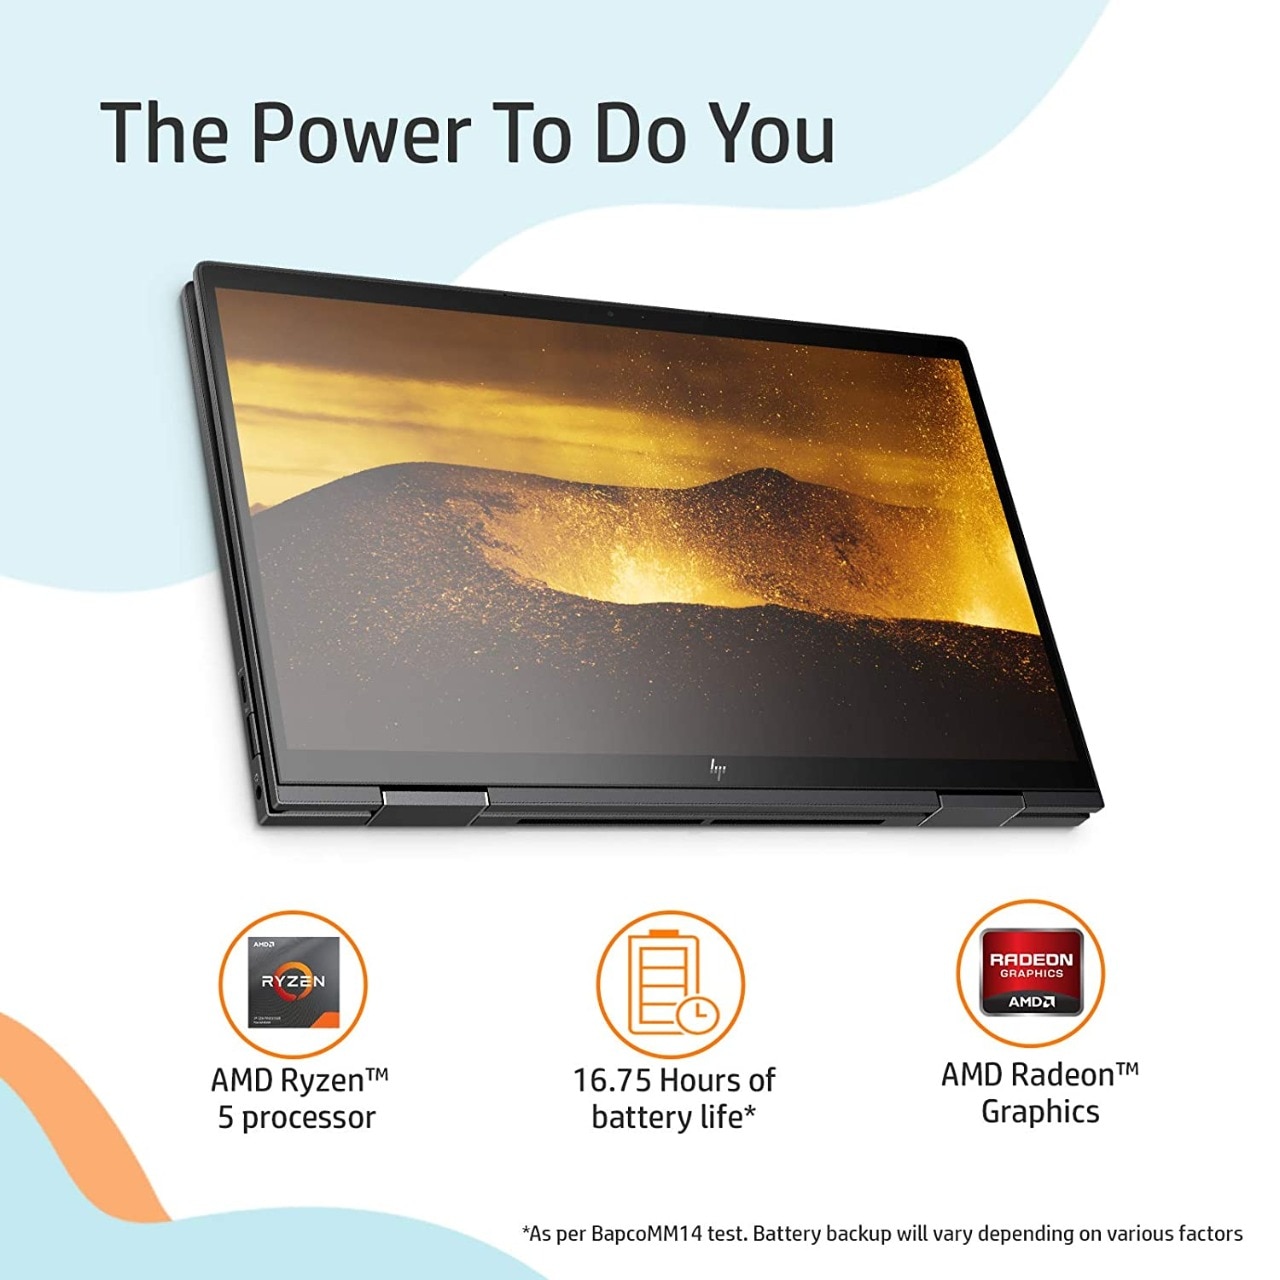 Amazon Laptop Diwali Deal: Combination of both laptop and tablet will be available in this HP touch screen laptop, full discount of up to 35 thousand in Amazon's sale